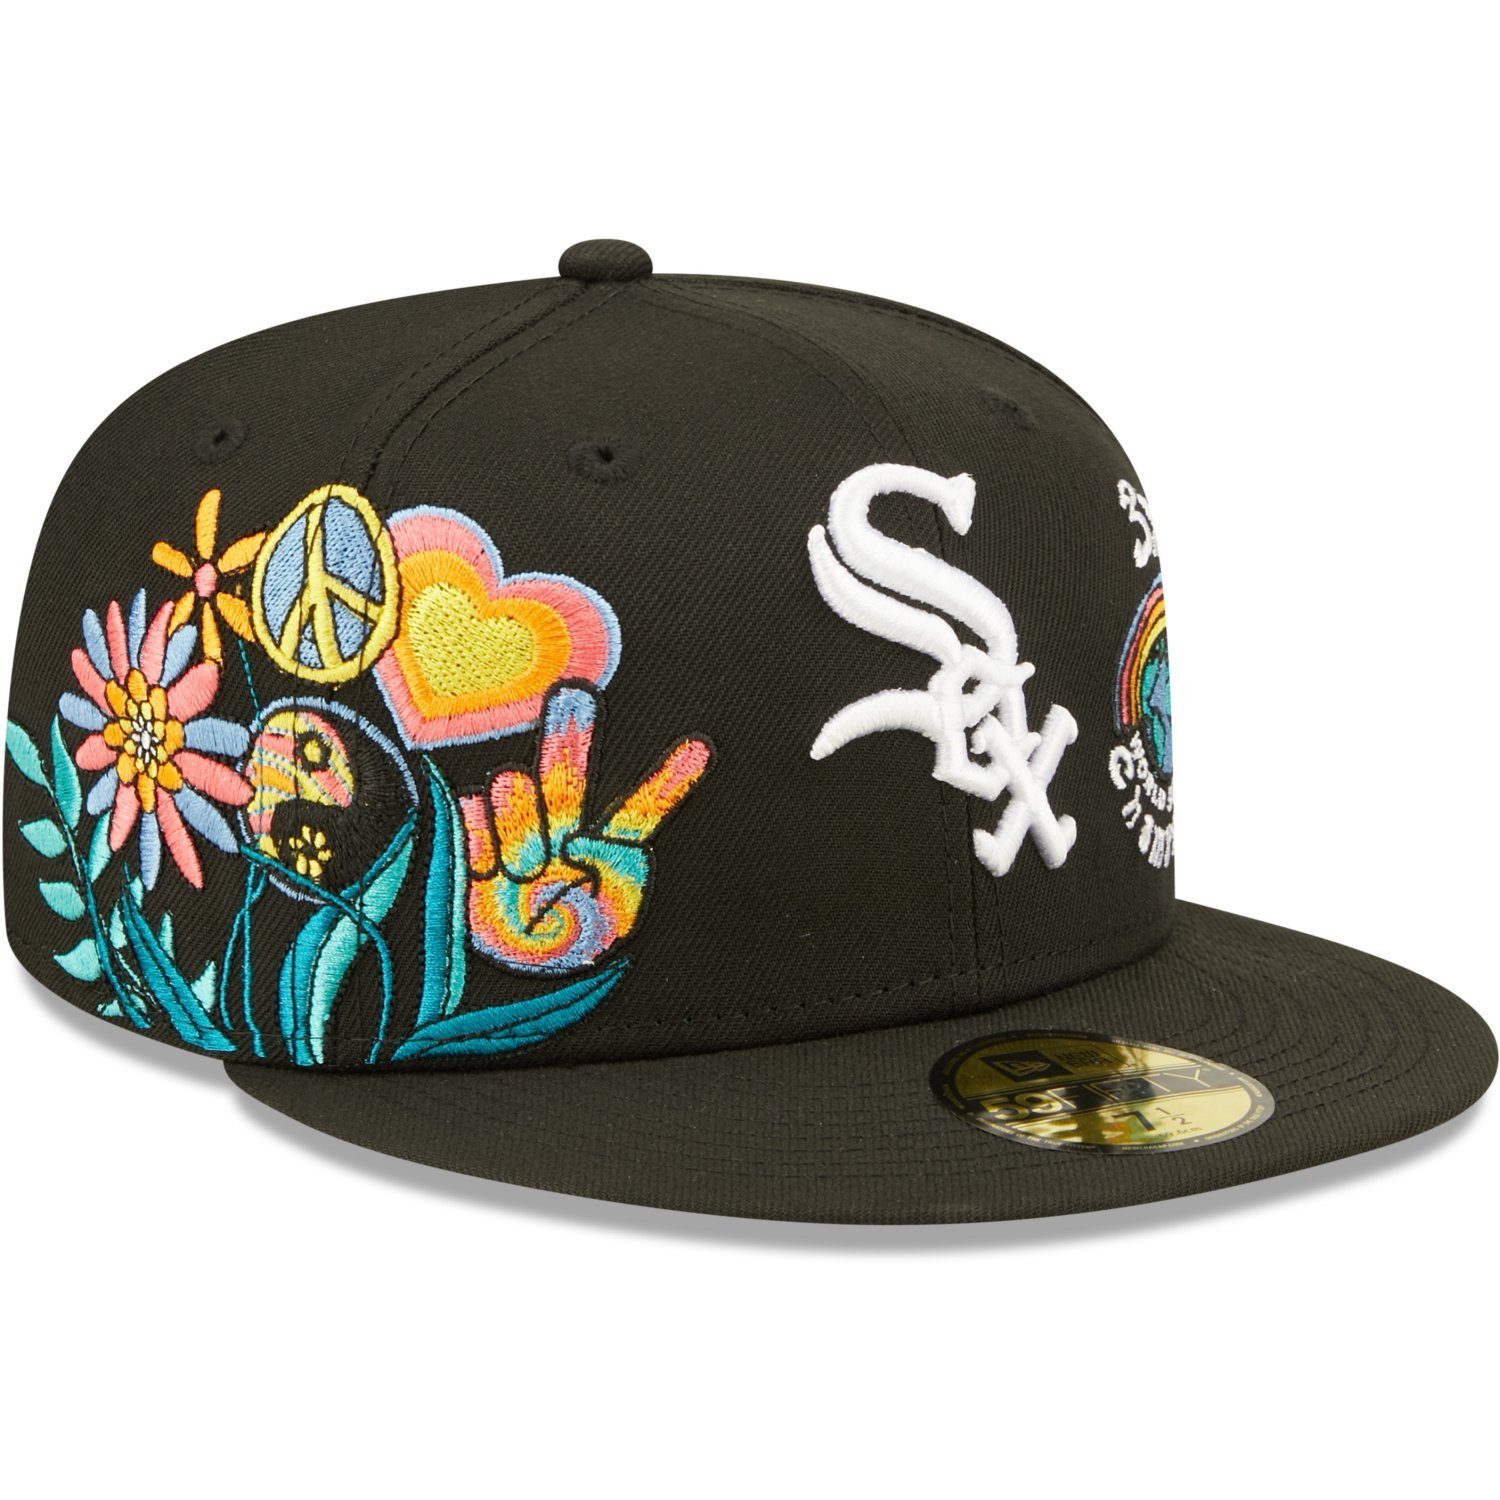 New Era Fitted Cap 59Fifty GROOVY Chicago White Sox